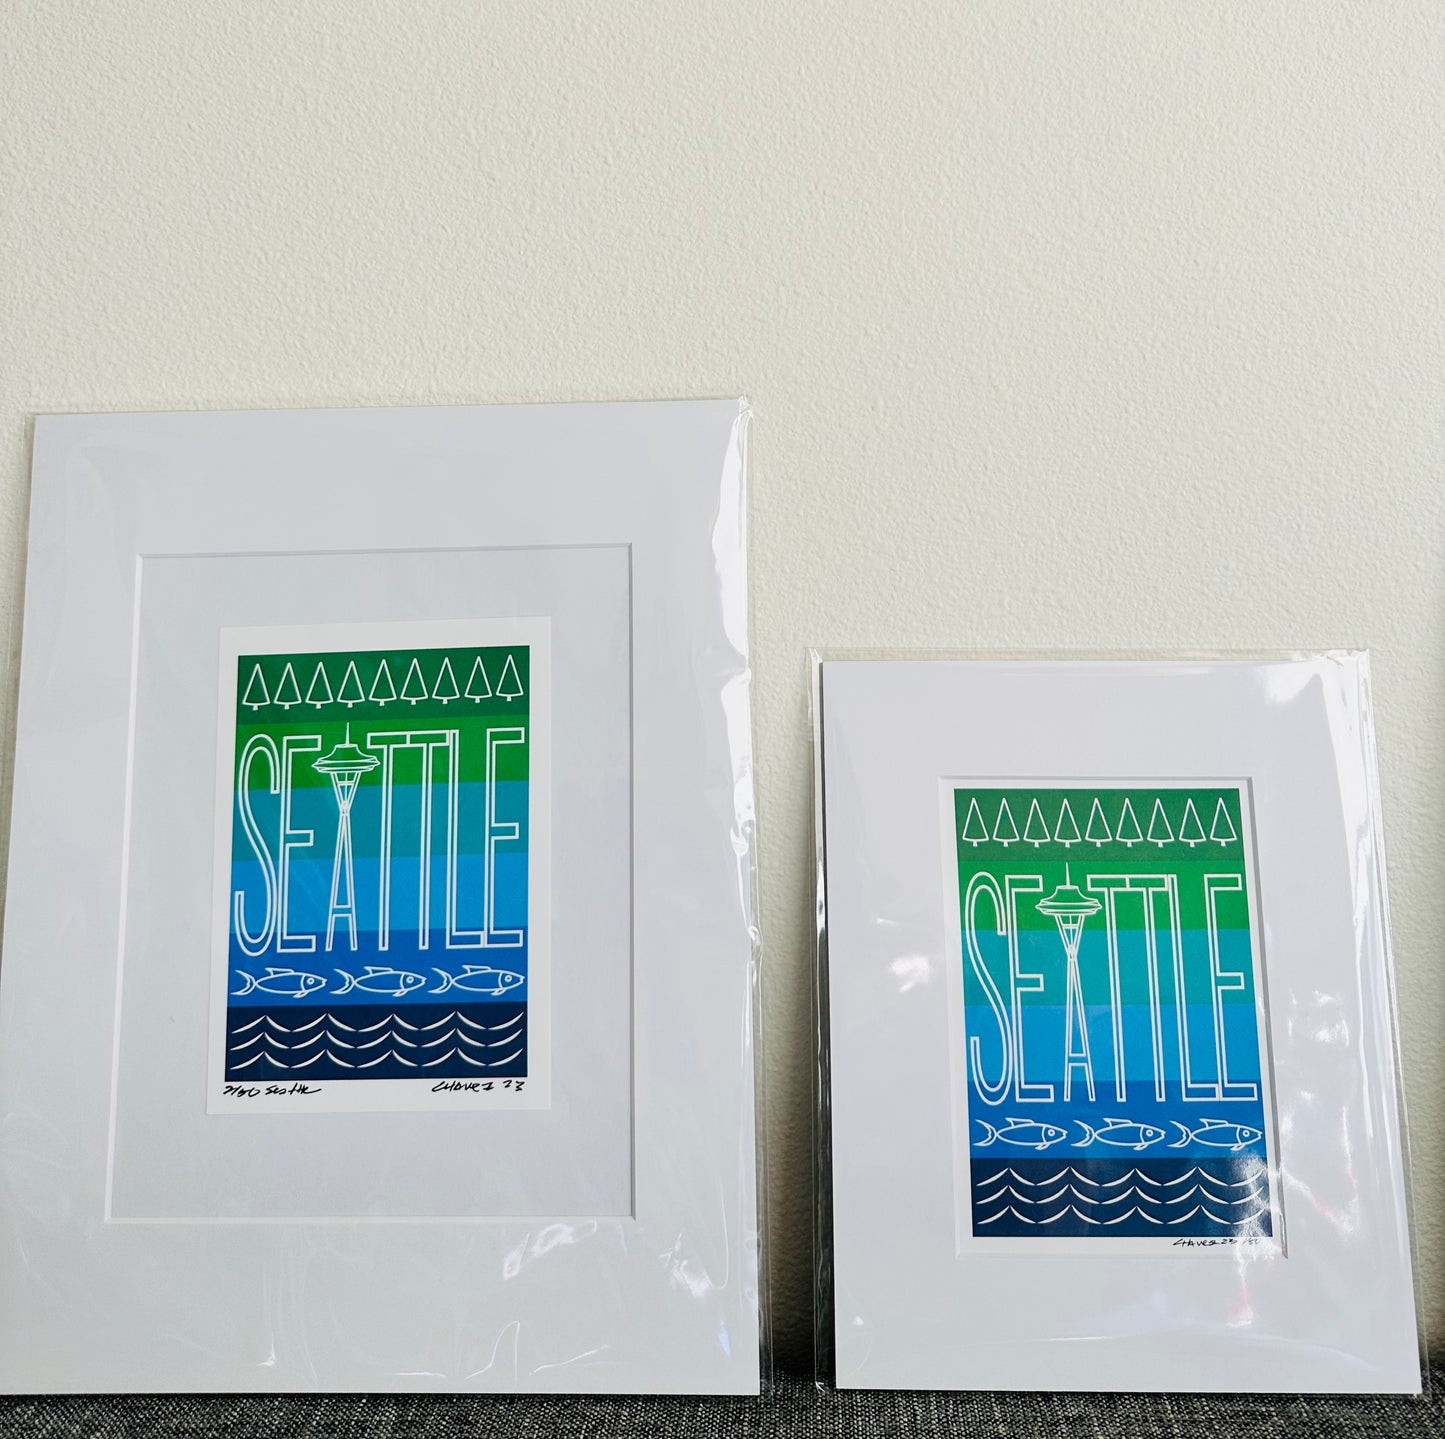 Iconic SEATTLE Space Needle Framed Printed Artwork Home Decor